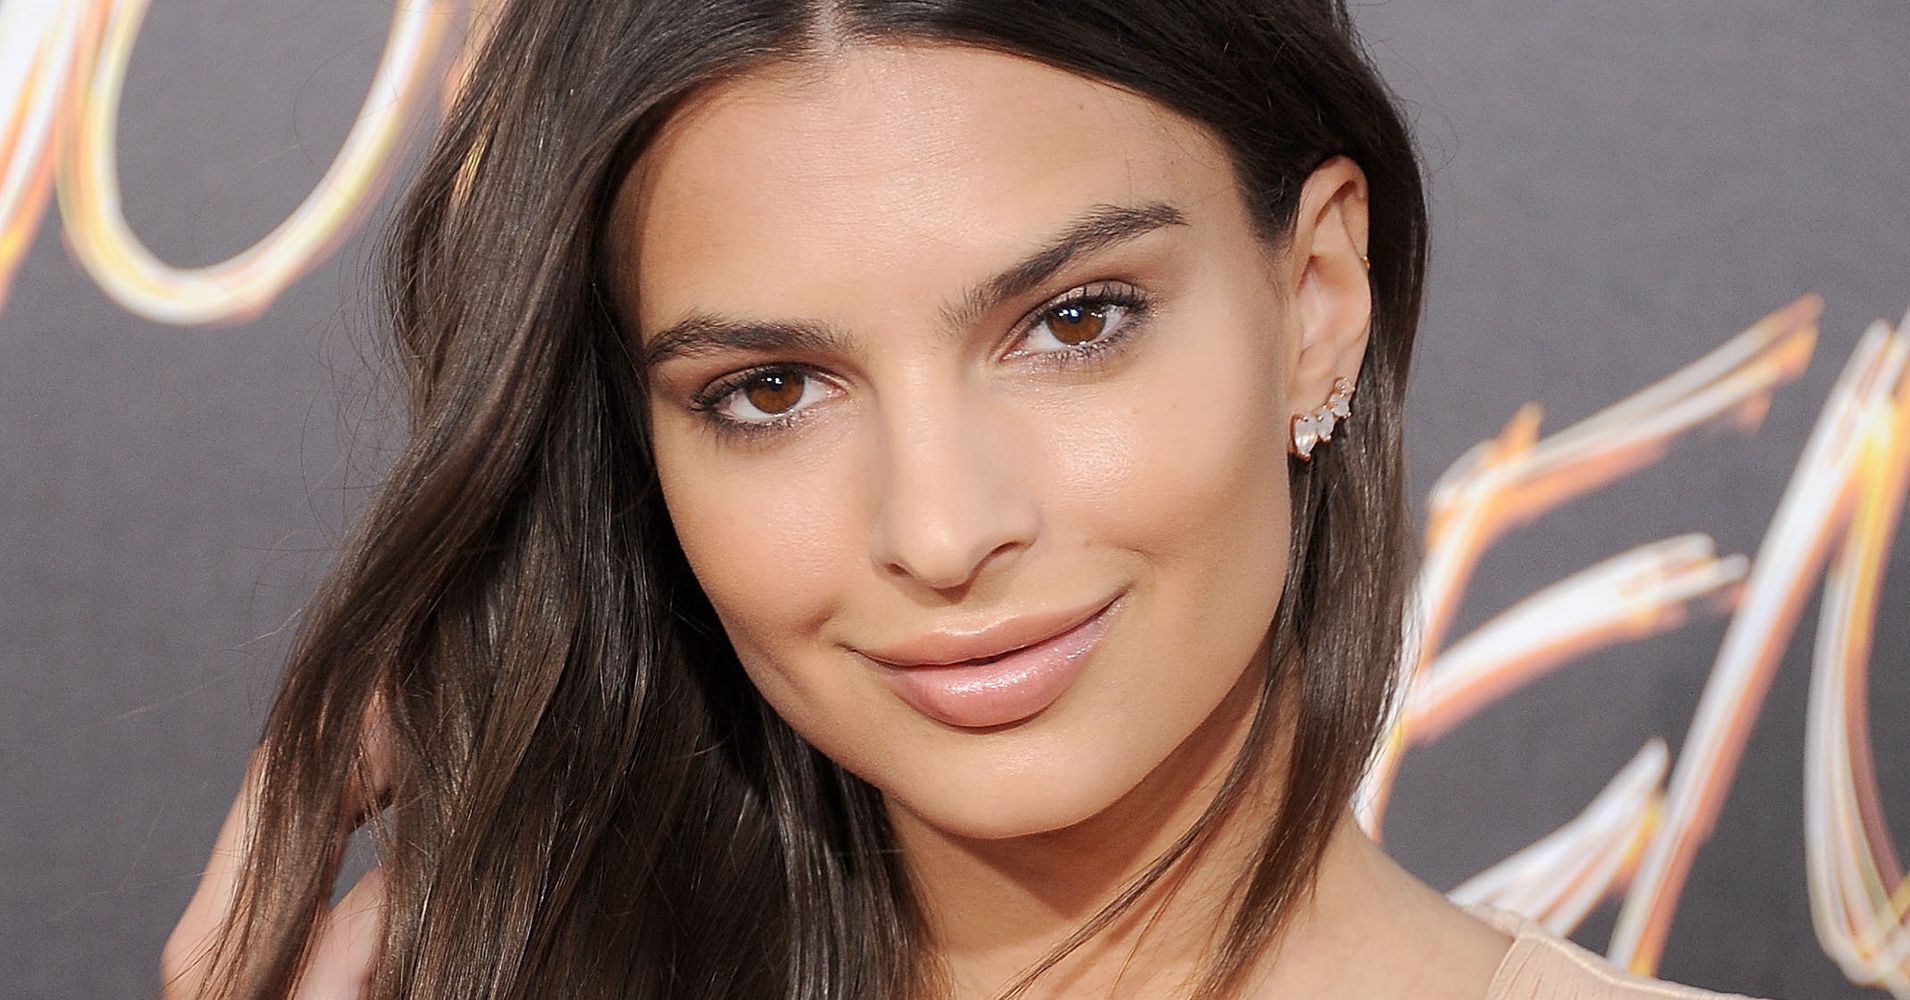 Emily Ratajkowski Takes The Plunge At We Are Your Friends Premiere